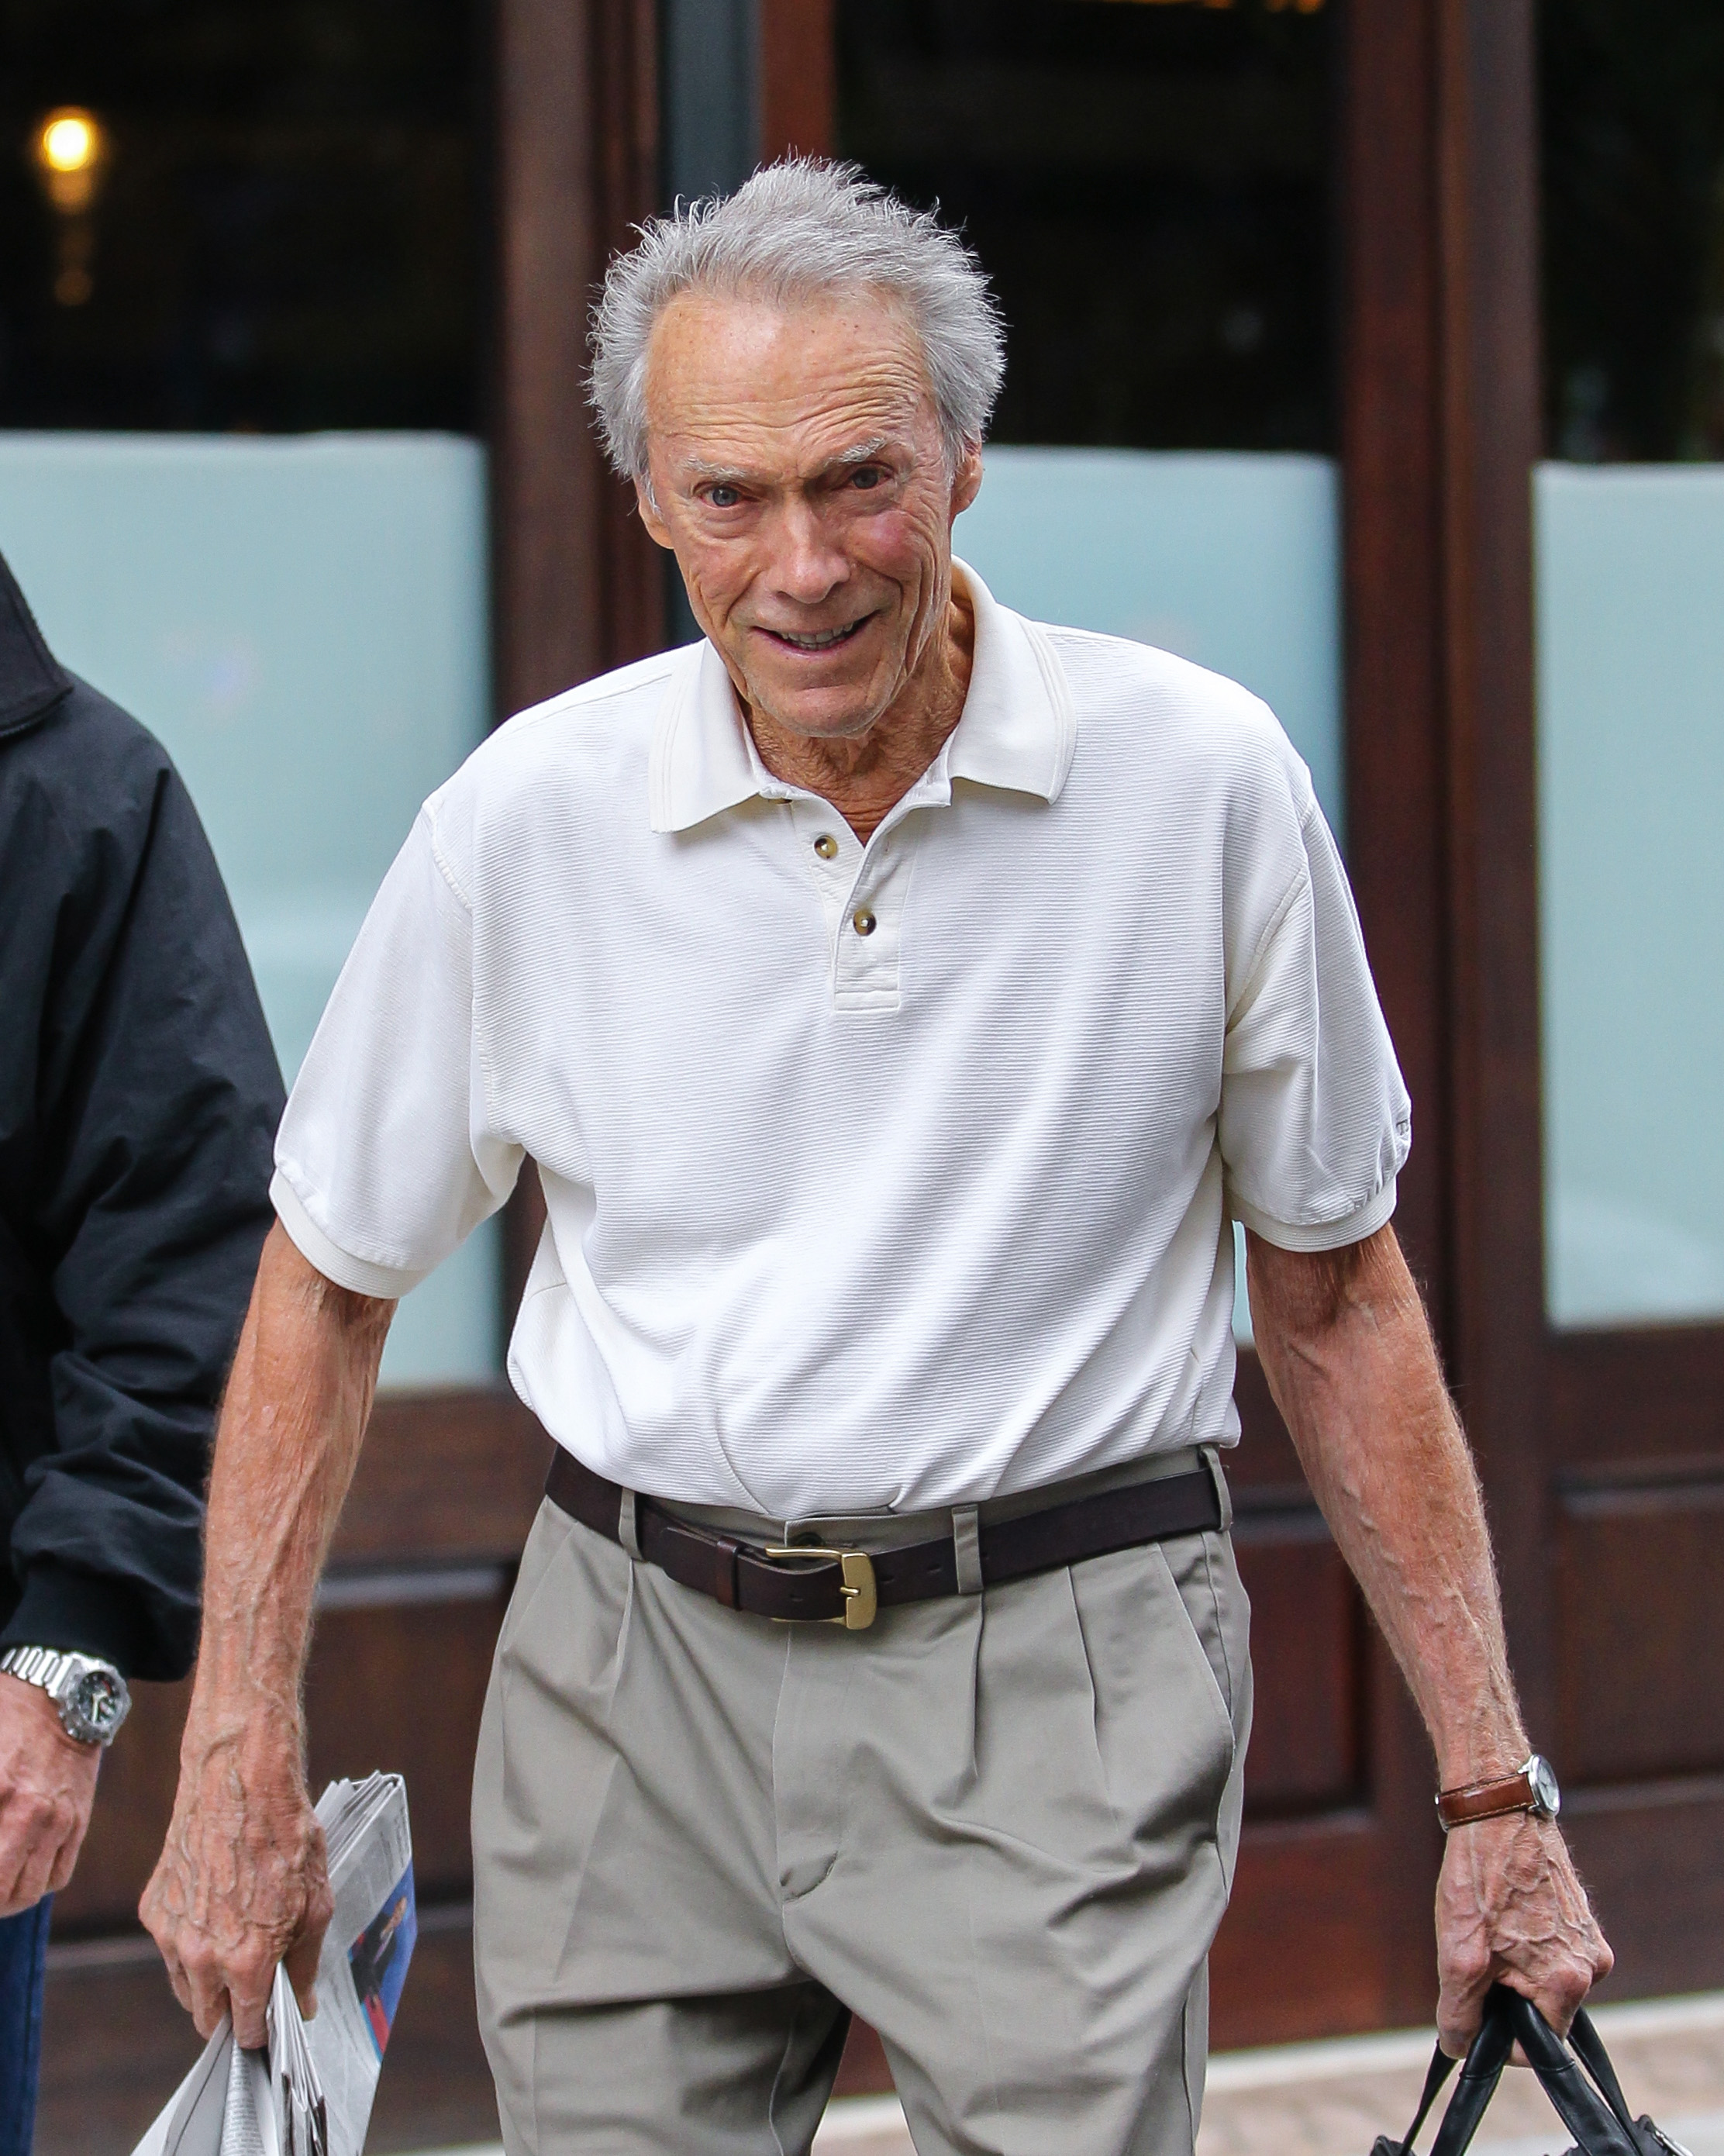 Clint Eastwood leaving Greenwich Hotel in New York City on October 16, 2013 | Source: Getty Images